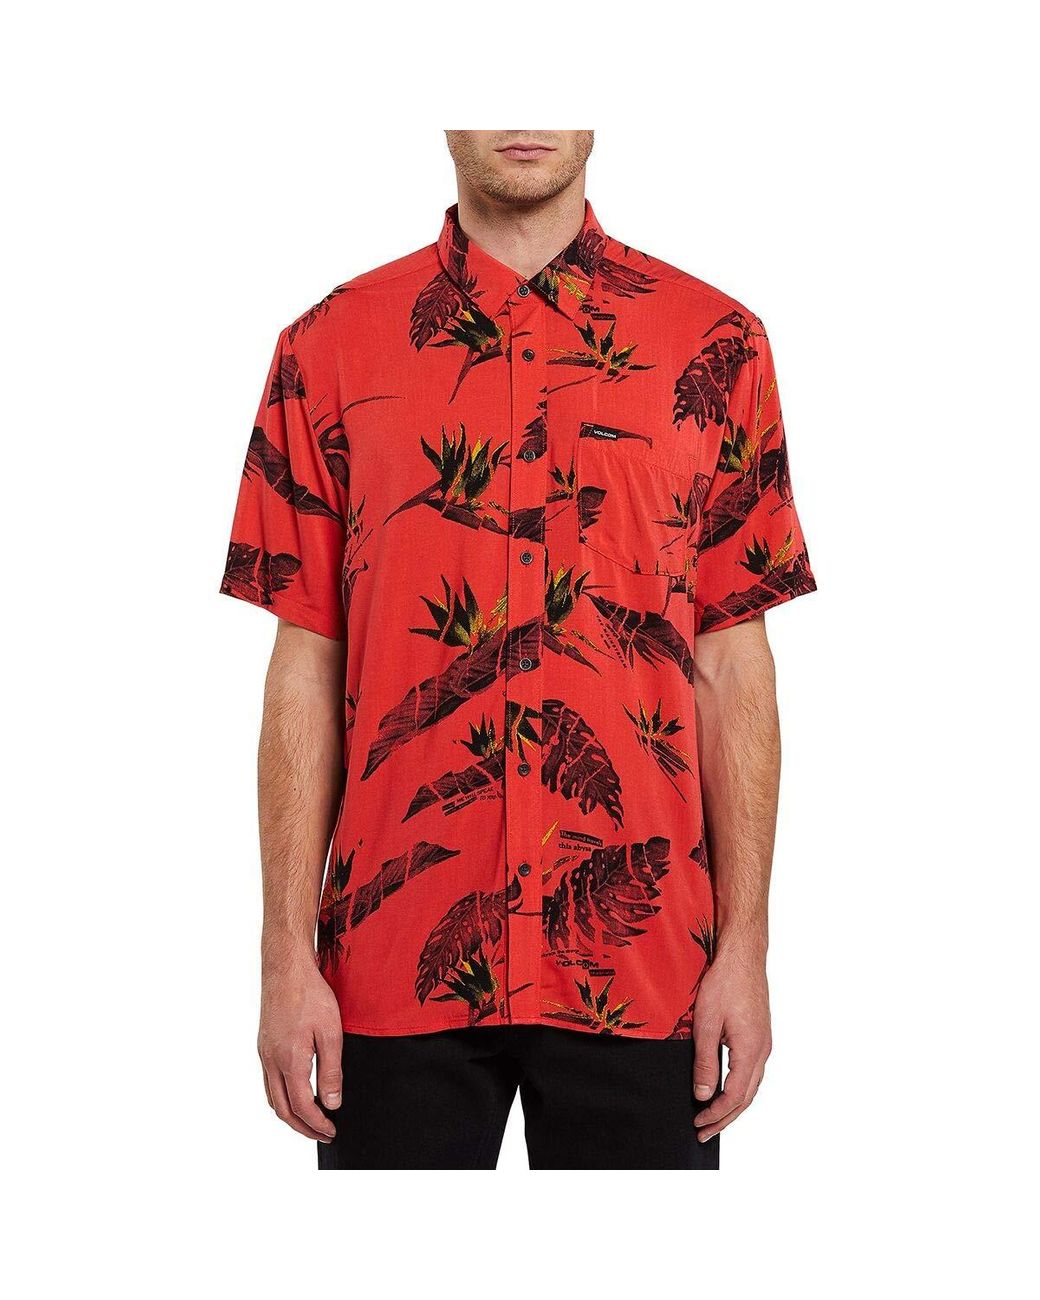 Volcom Floral Erupter Short Sleeve Button Down Shirt in Red for Men - Lyst